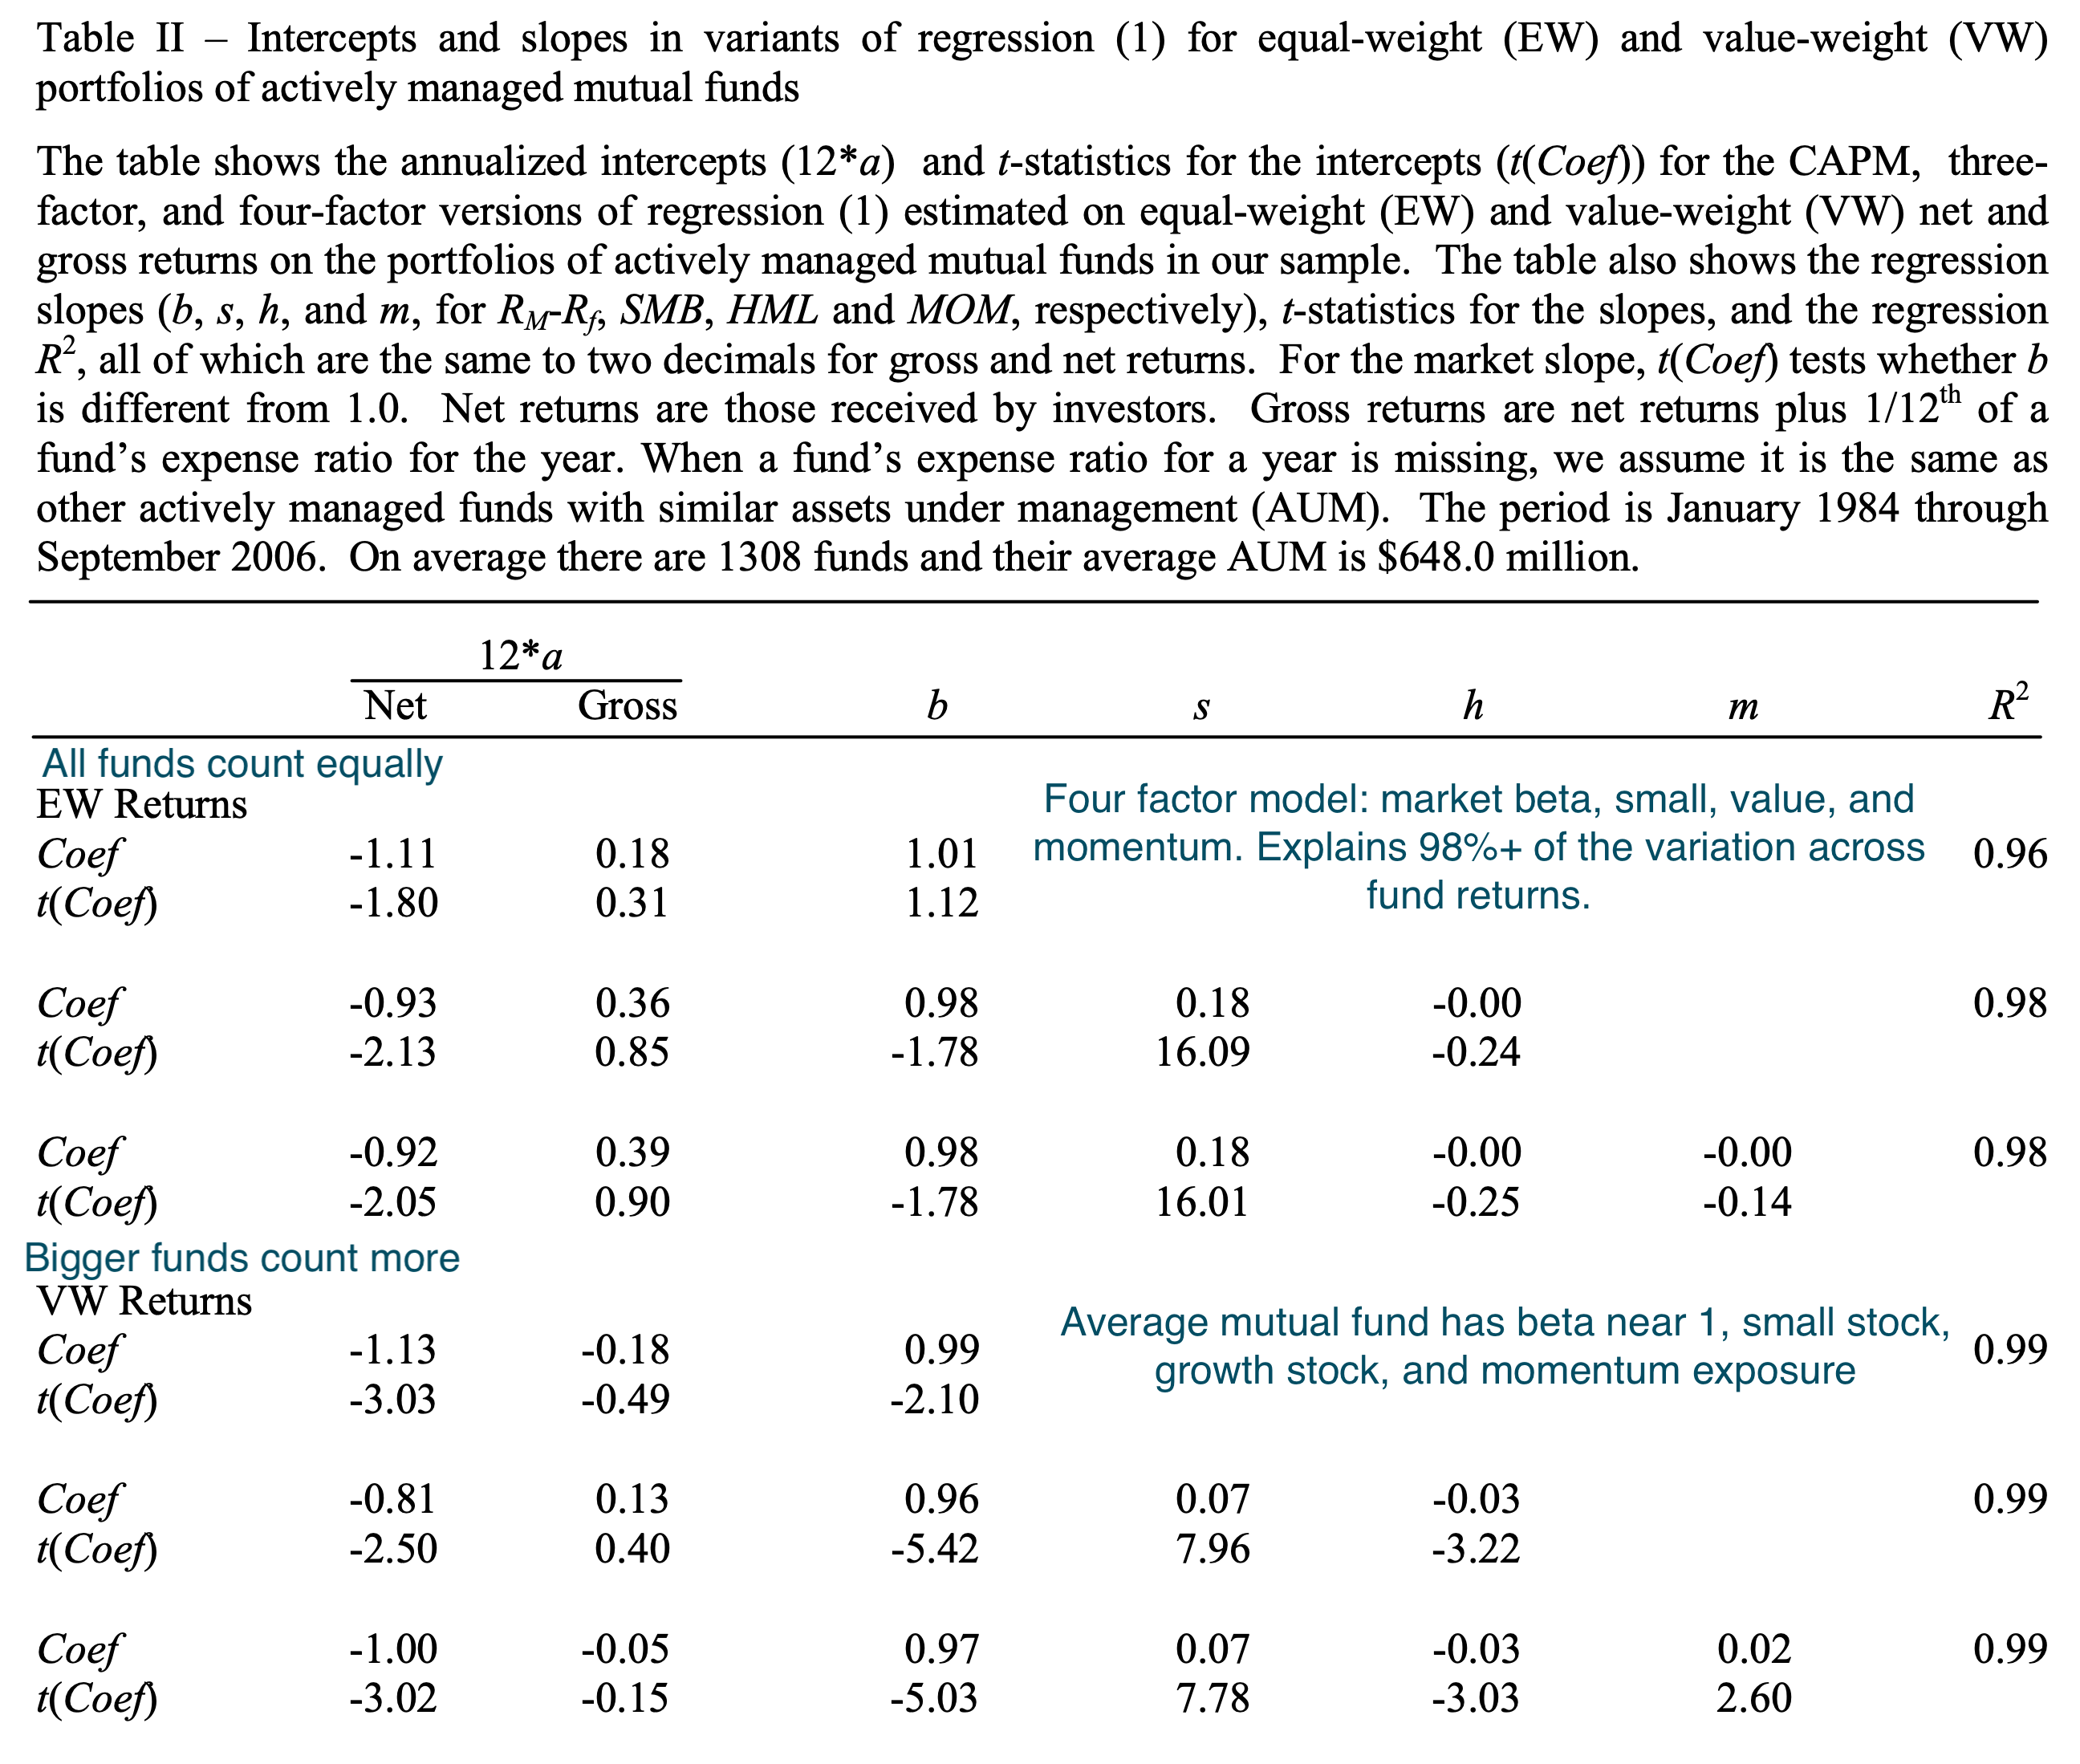 The average mutual fund has negative alpha, after fees. Source: Fama and French (2010).